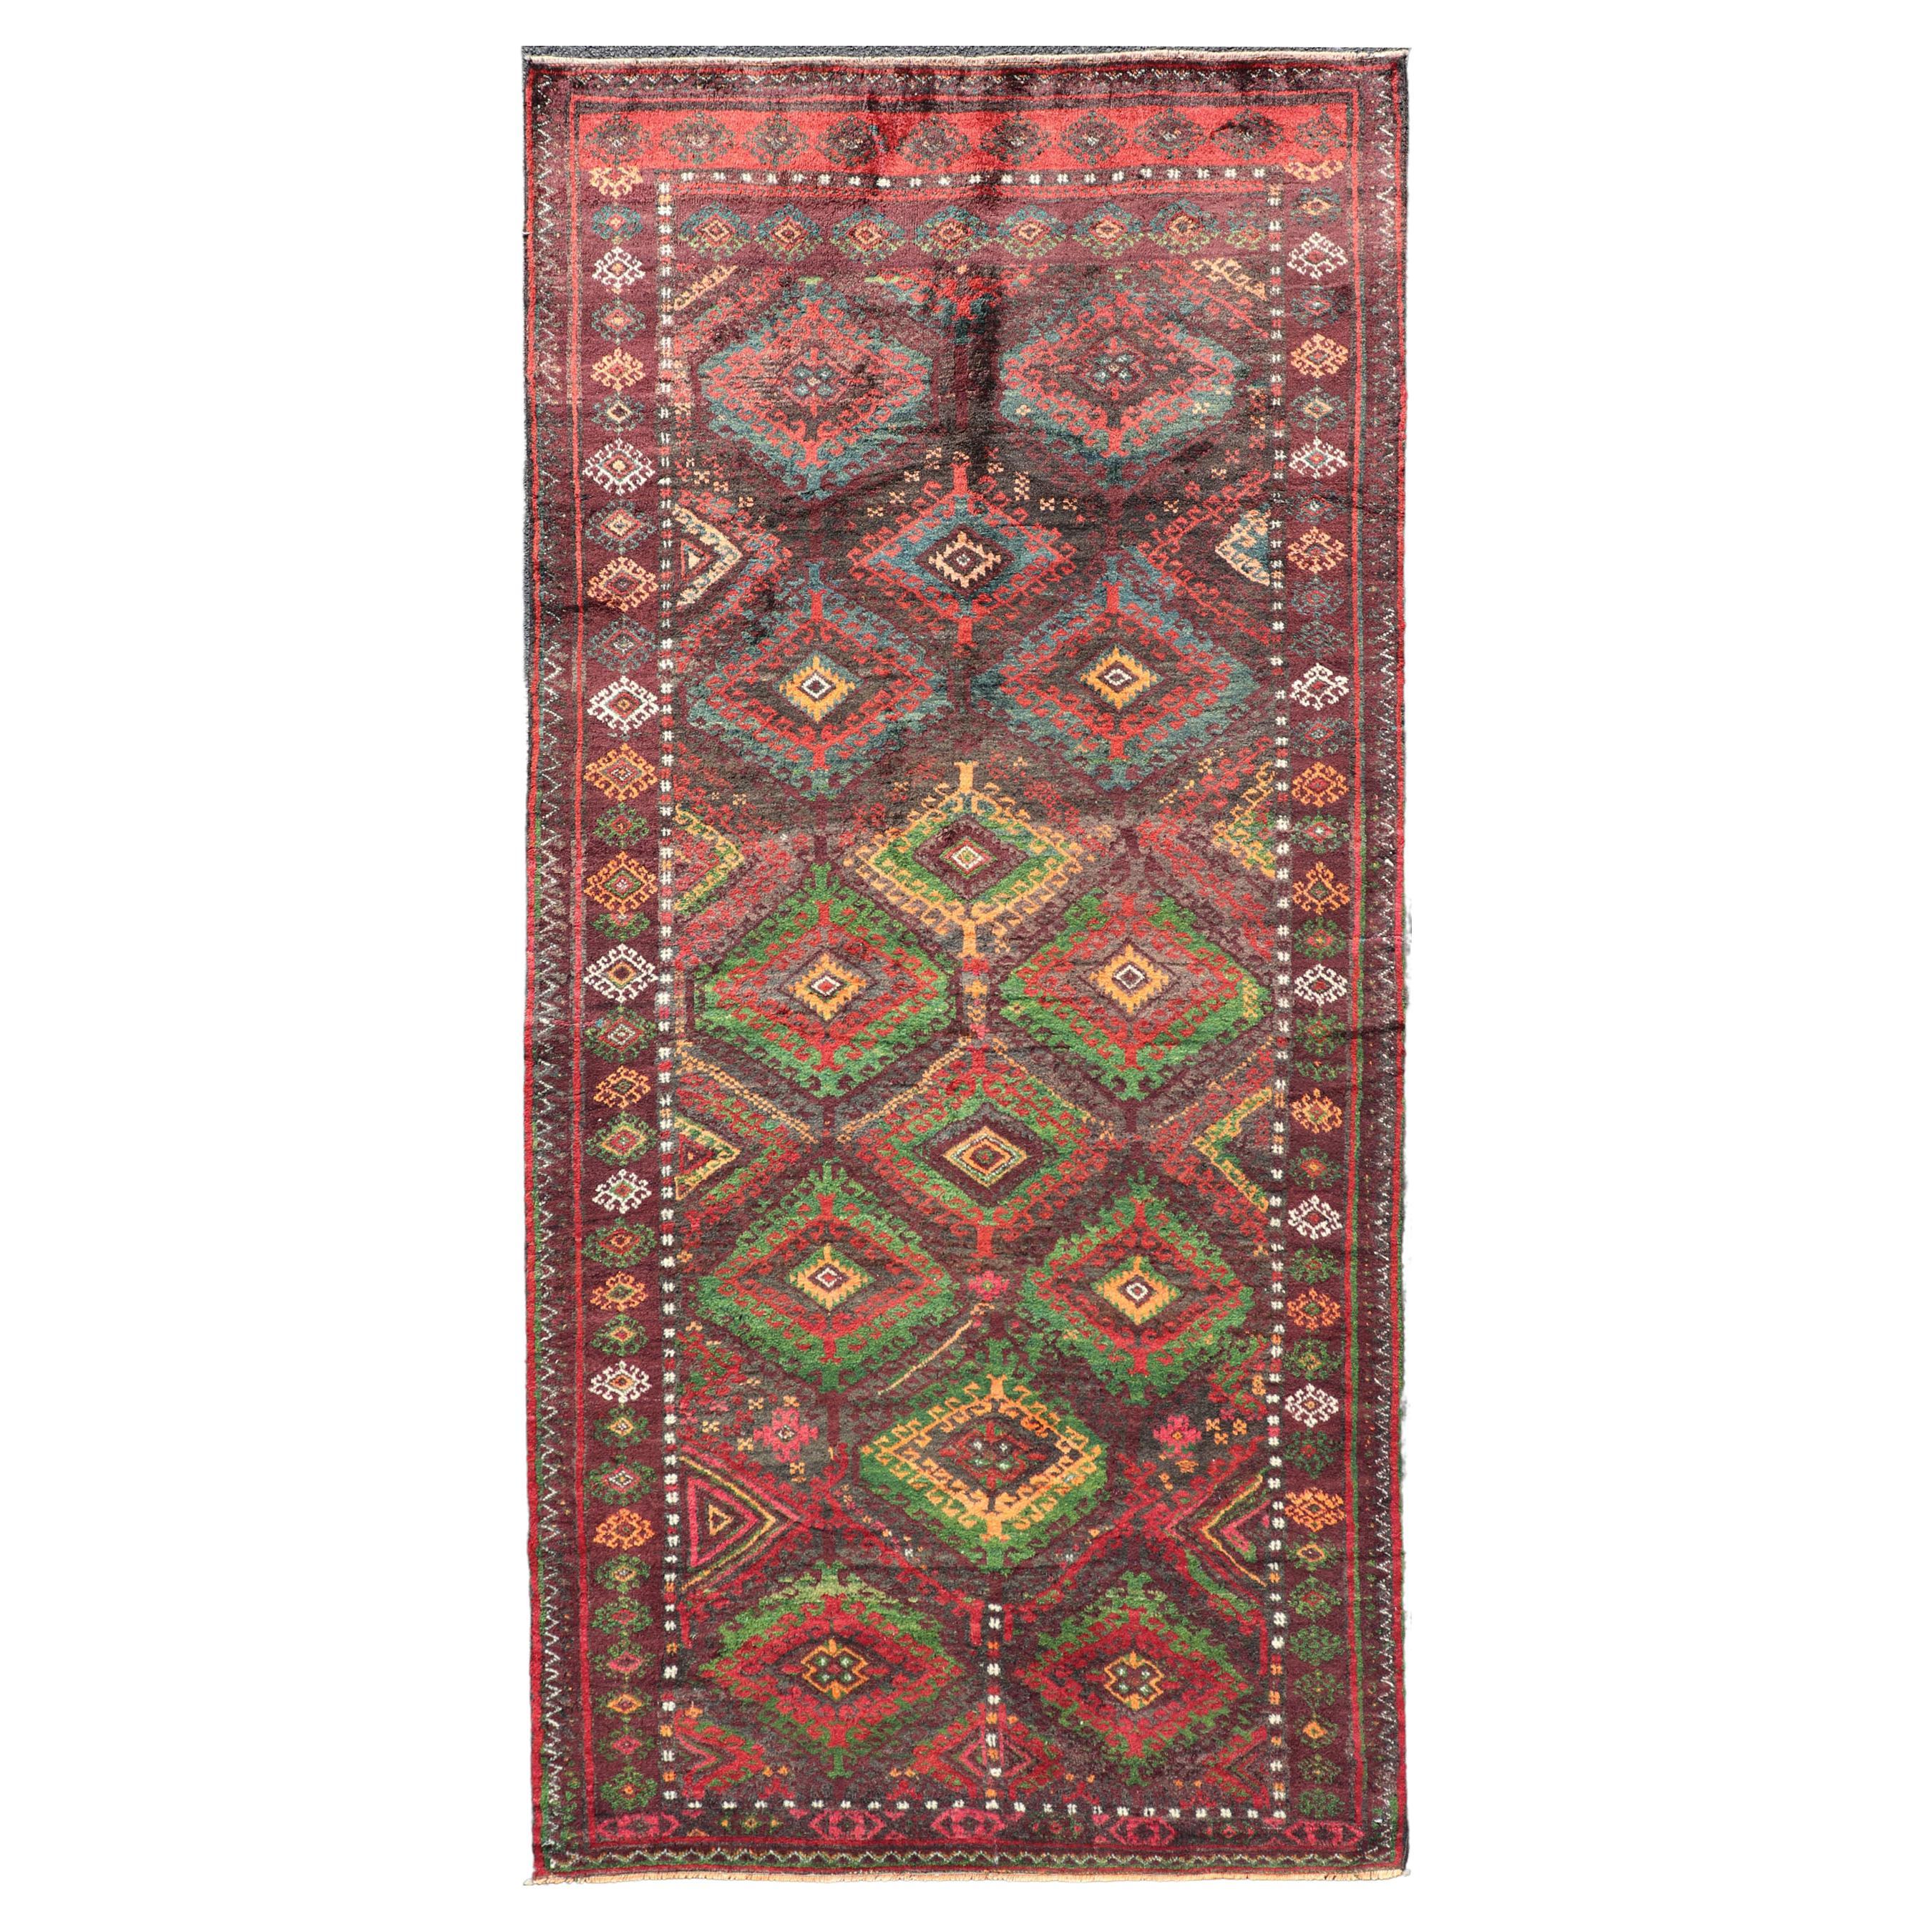 Antique Baluch Tribal Rug with All-Over Geometric in Colorful Design and Motifs 